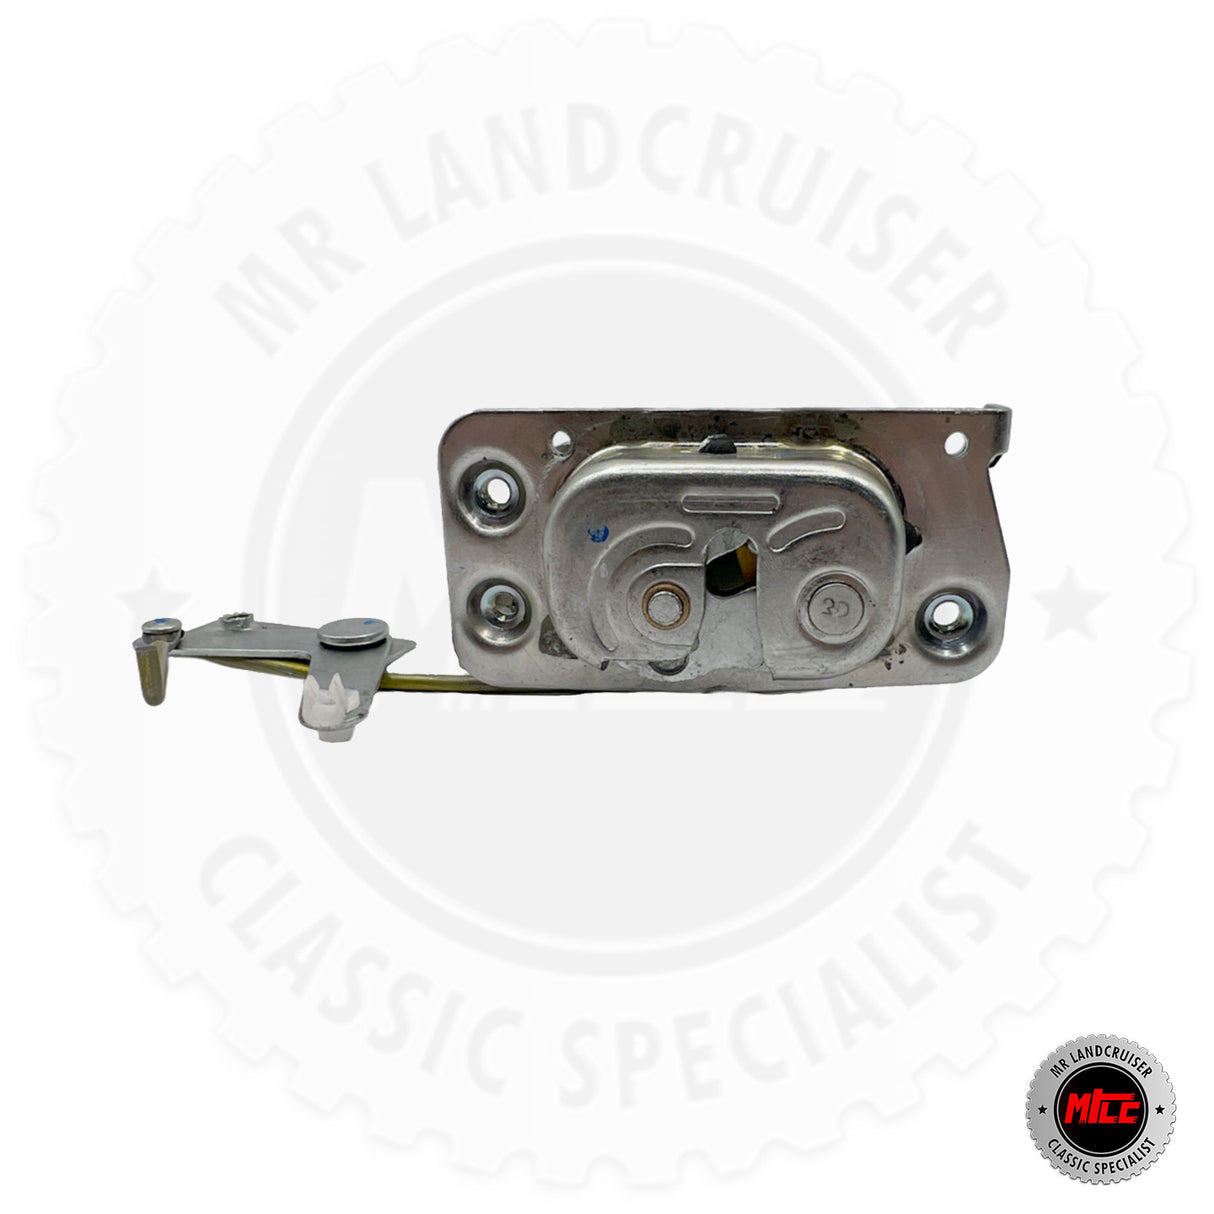 Door Mech Assembly for 40 Series Landcruiser - Driver Side (Right)